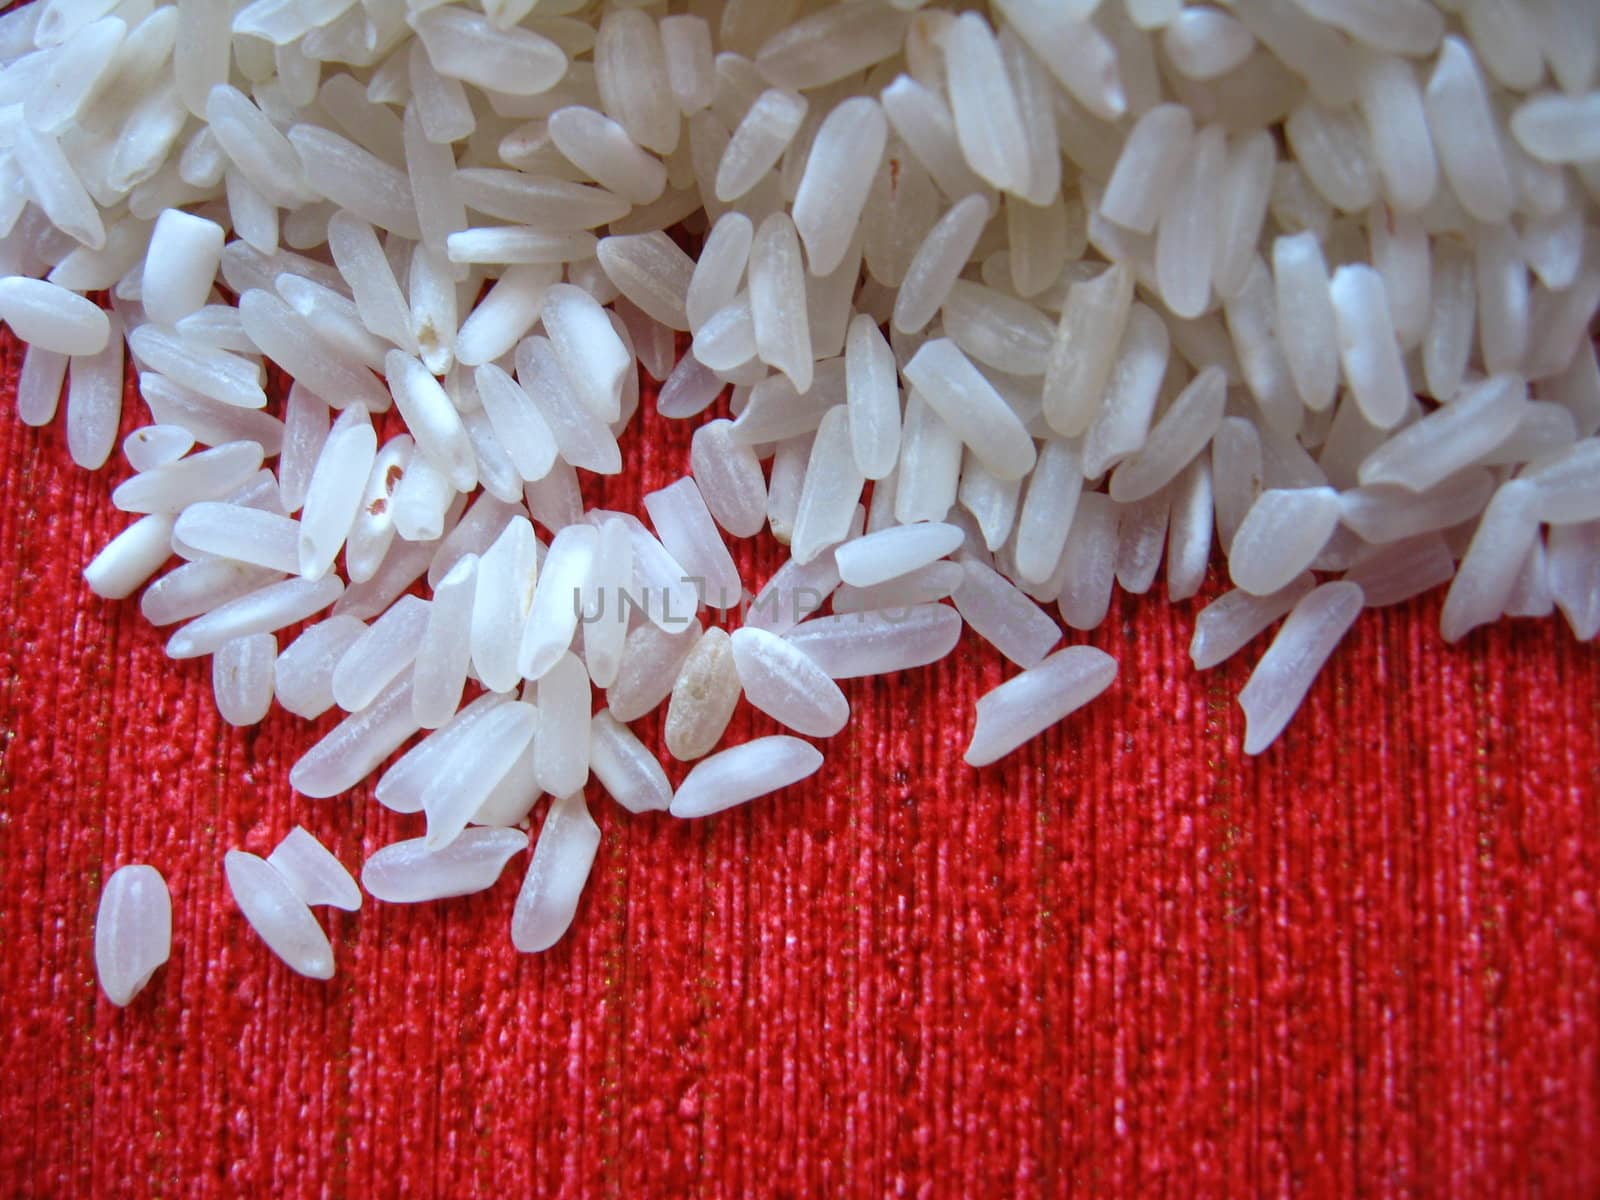 scattered rice on a red background by alexmak